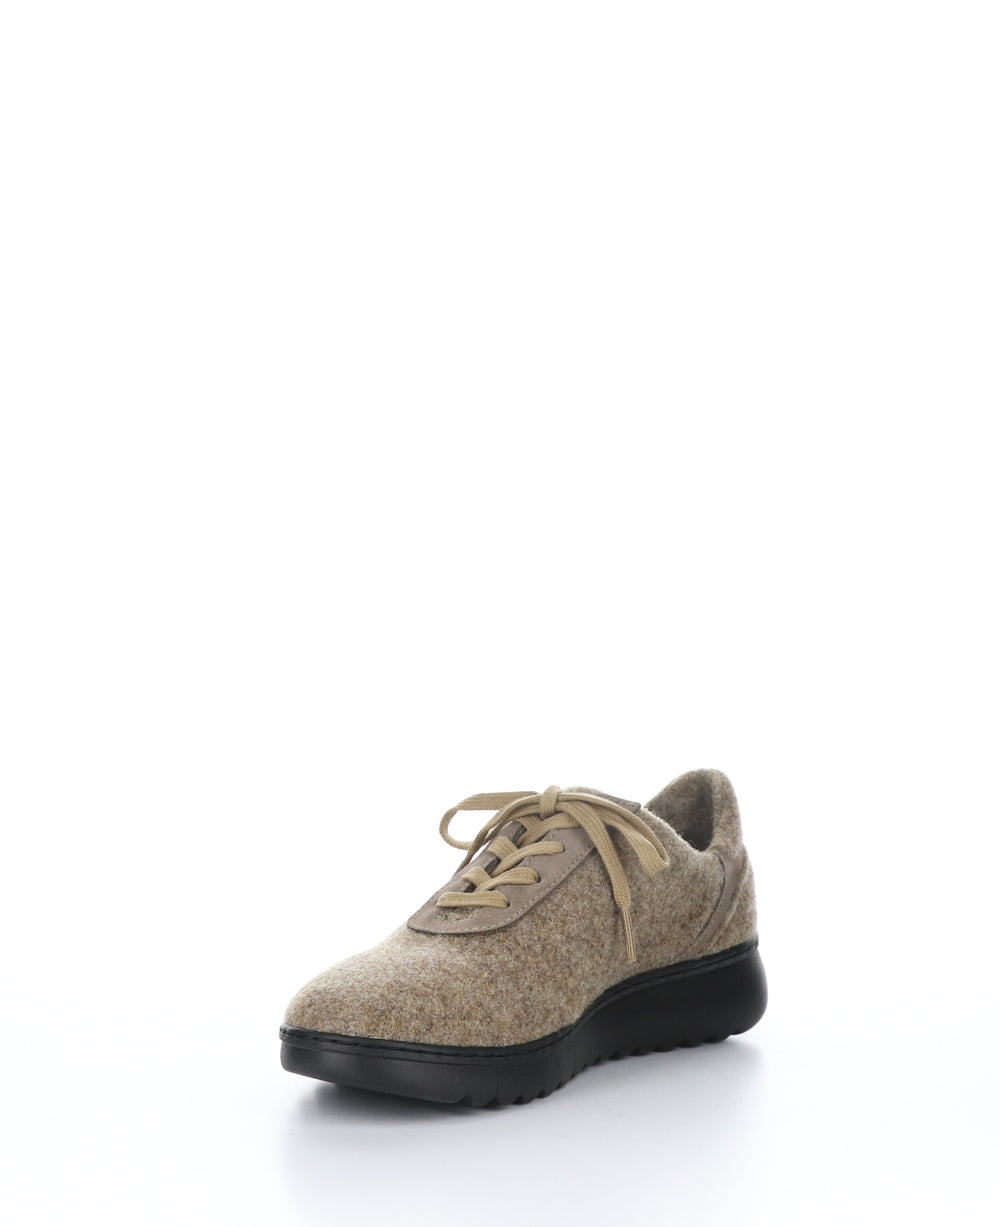 ELRA670SOF Taupe Round Toe Shoes